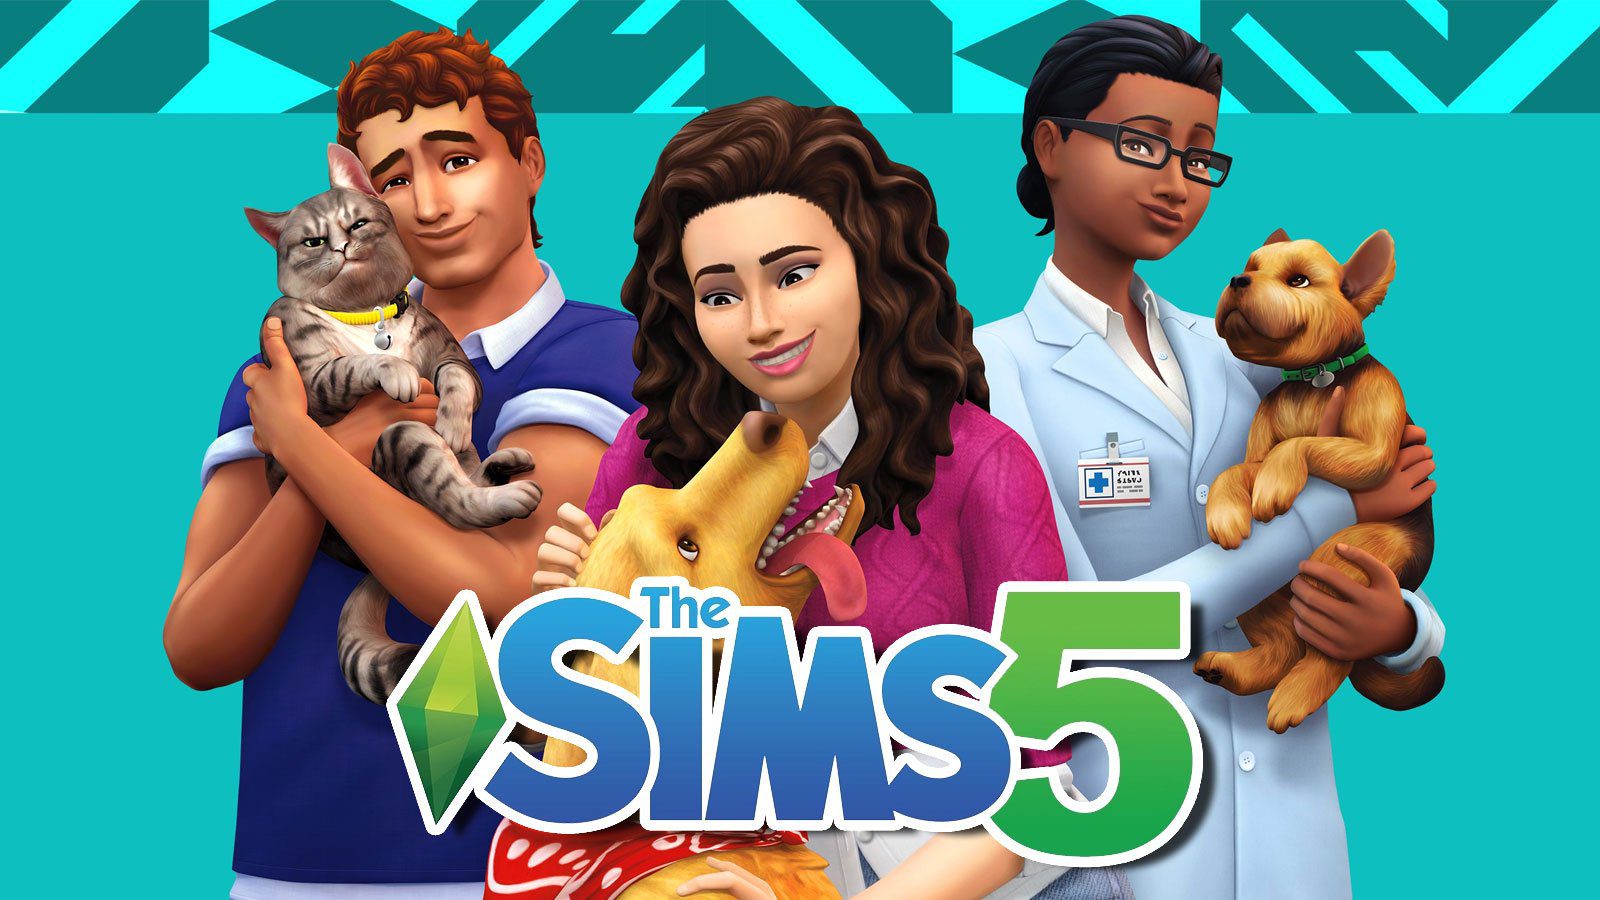 Sims 5 Release Date